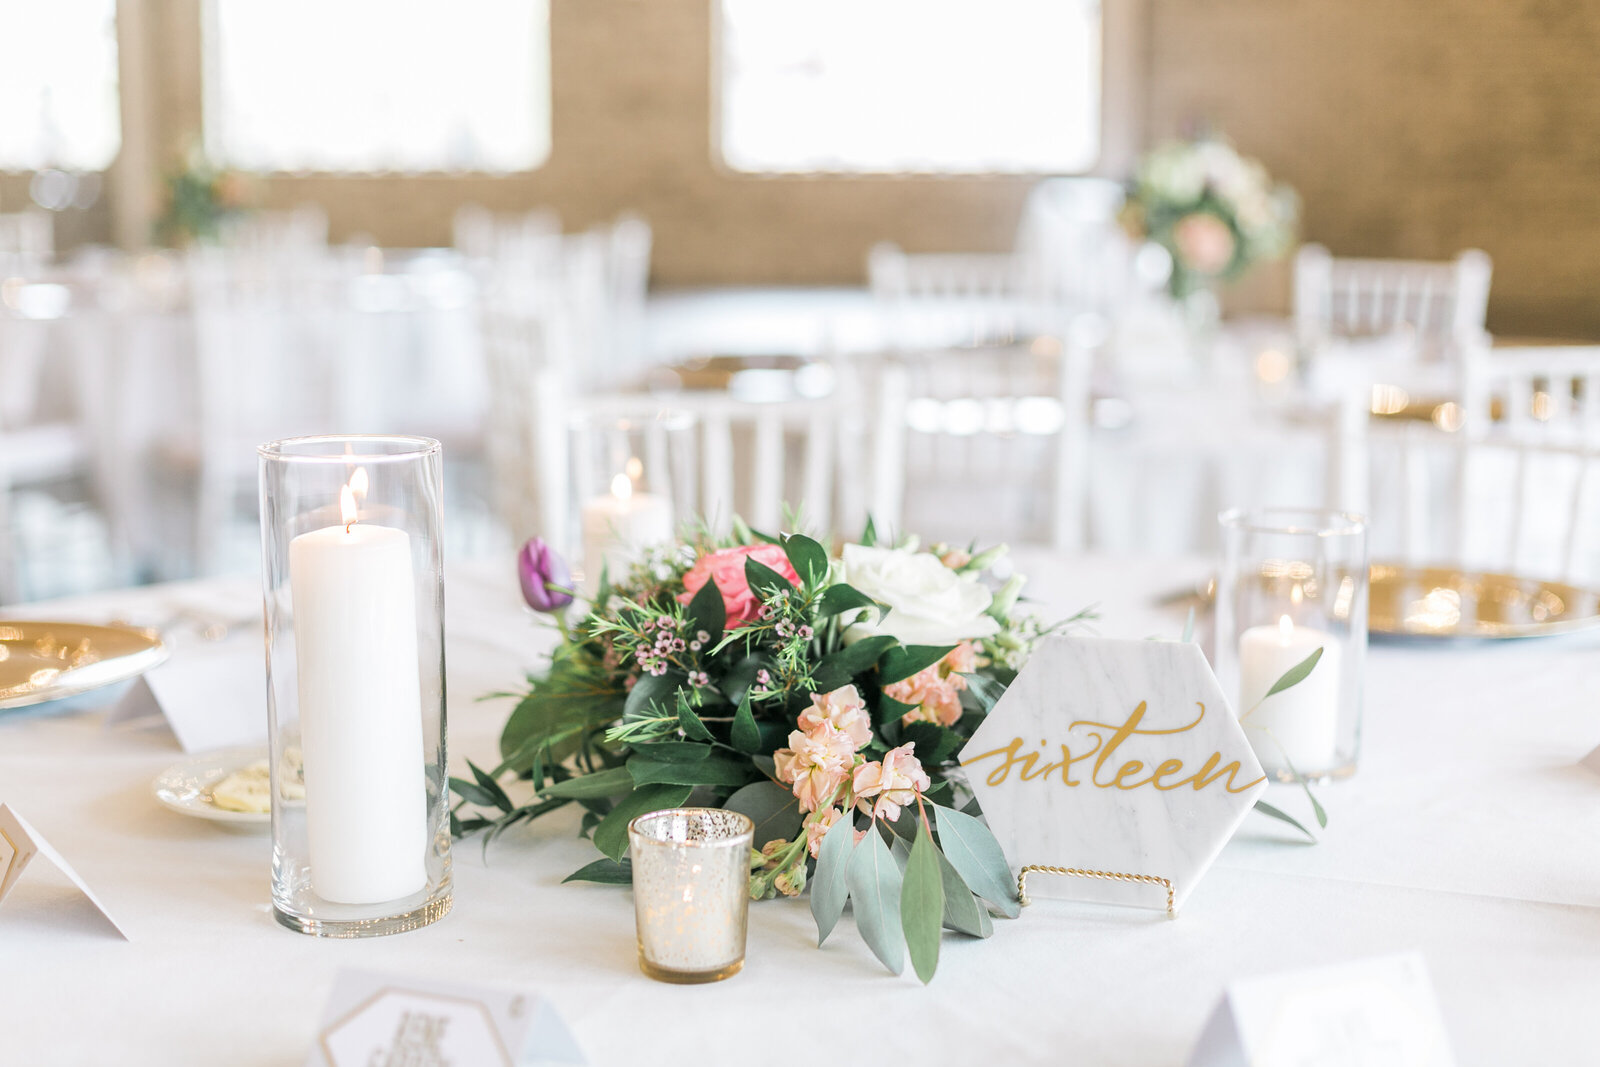 Tablescape of wedding with flowers